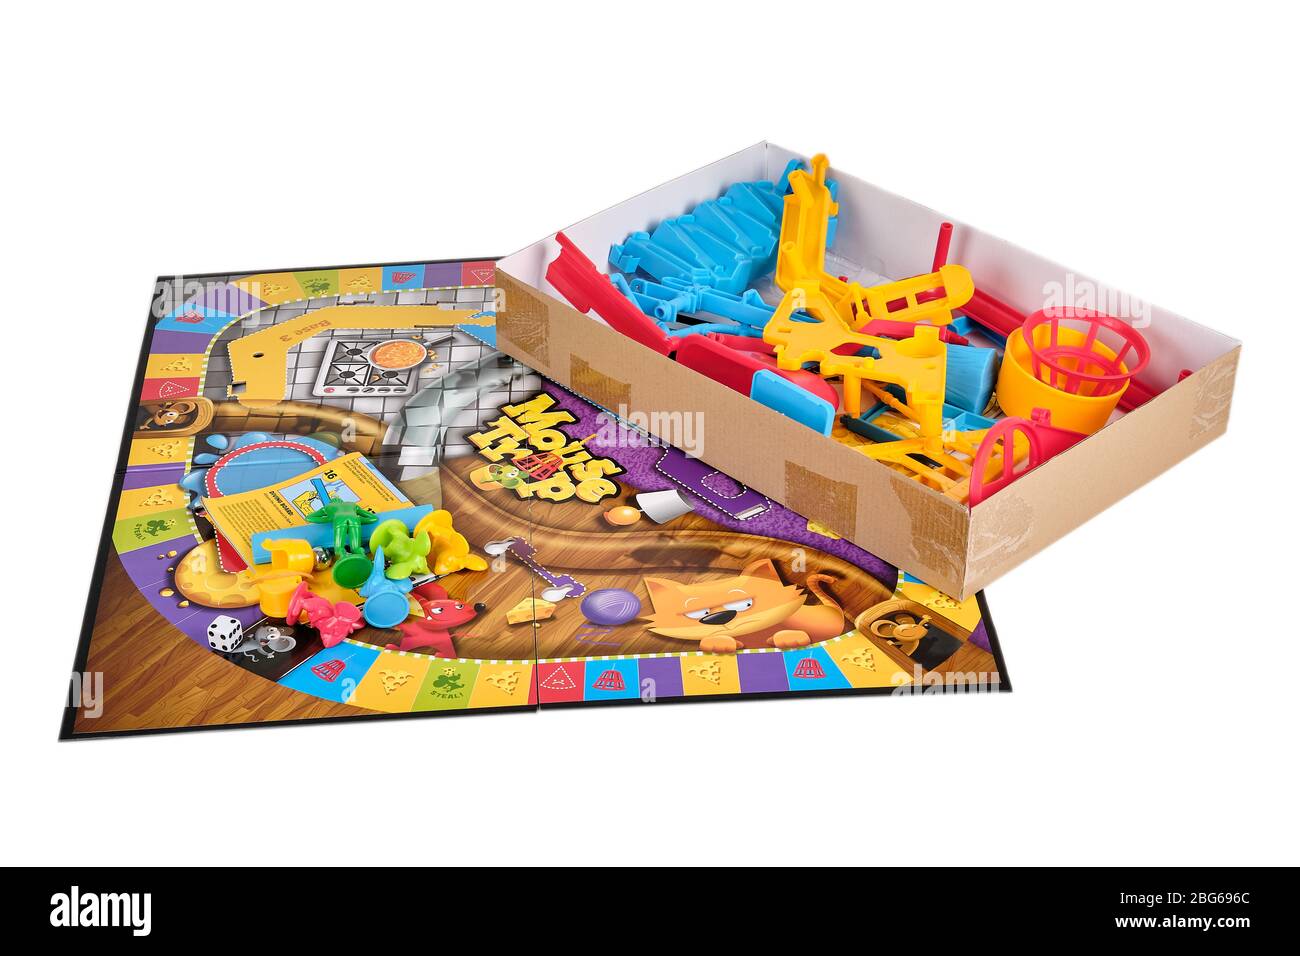 https://c8.alamy.com/comp/2BG696C/close-up-of-hasbro-mouse-trap-board-game-board-and-box-containing-game-pieces-ready-to-be-assembled-2BG696C.jpg